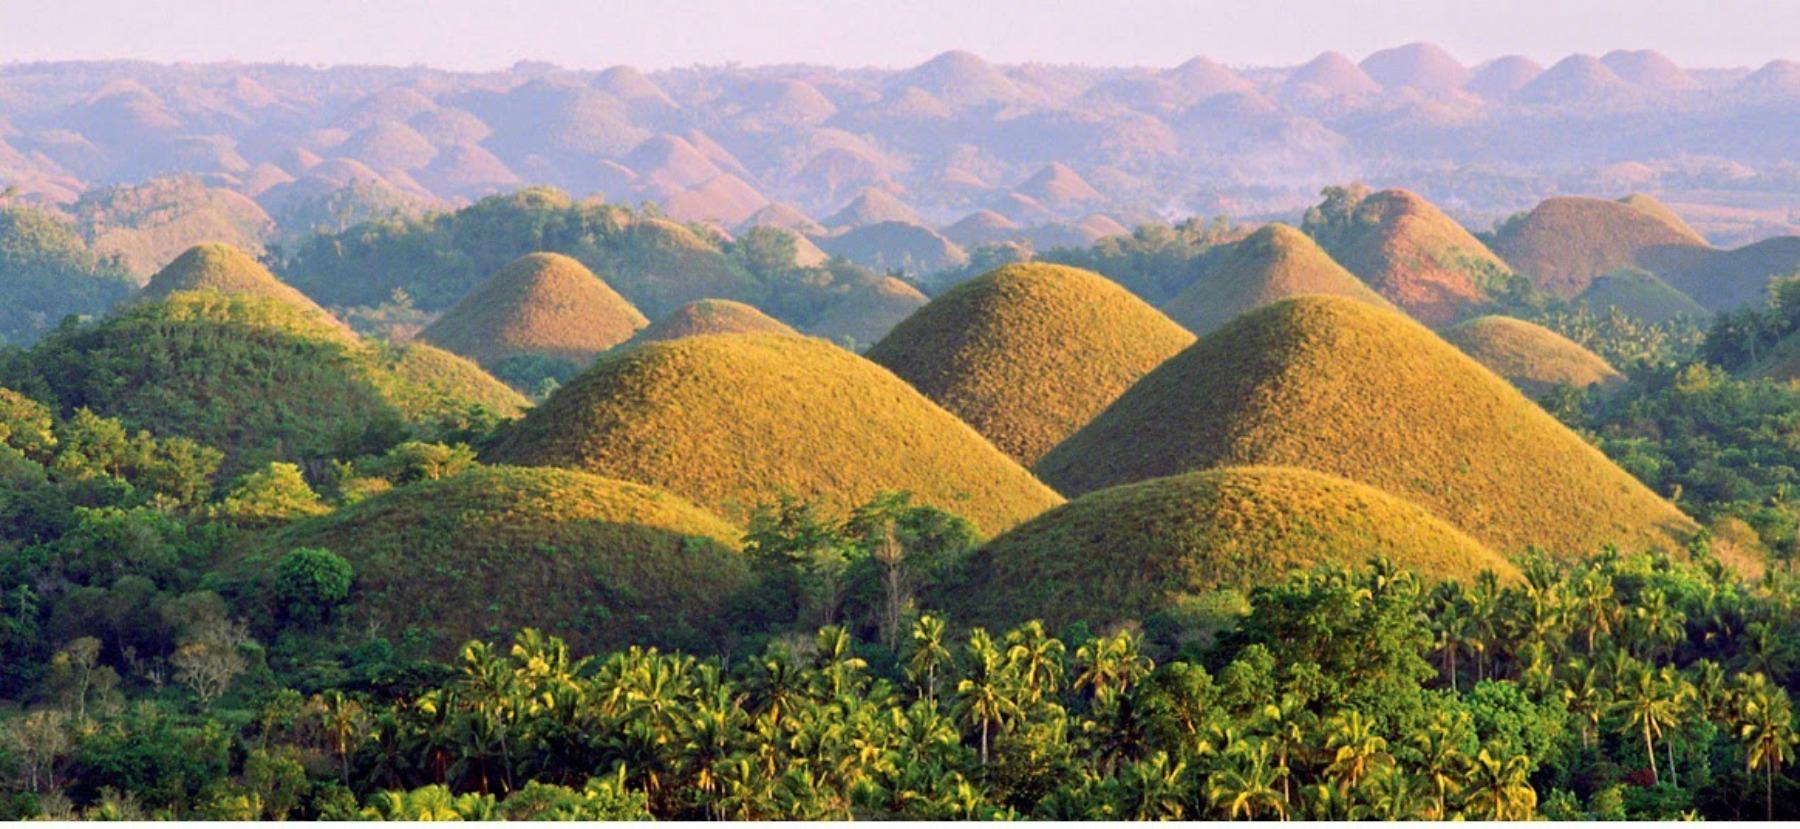 Bohol and its Chocolate Hills (Philippines) Golden Scope